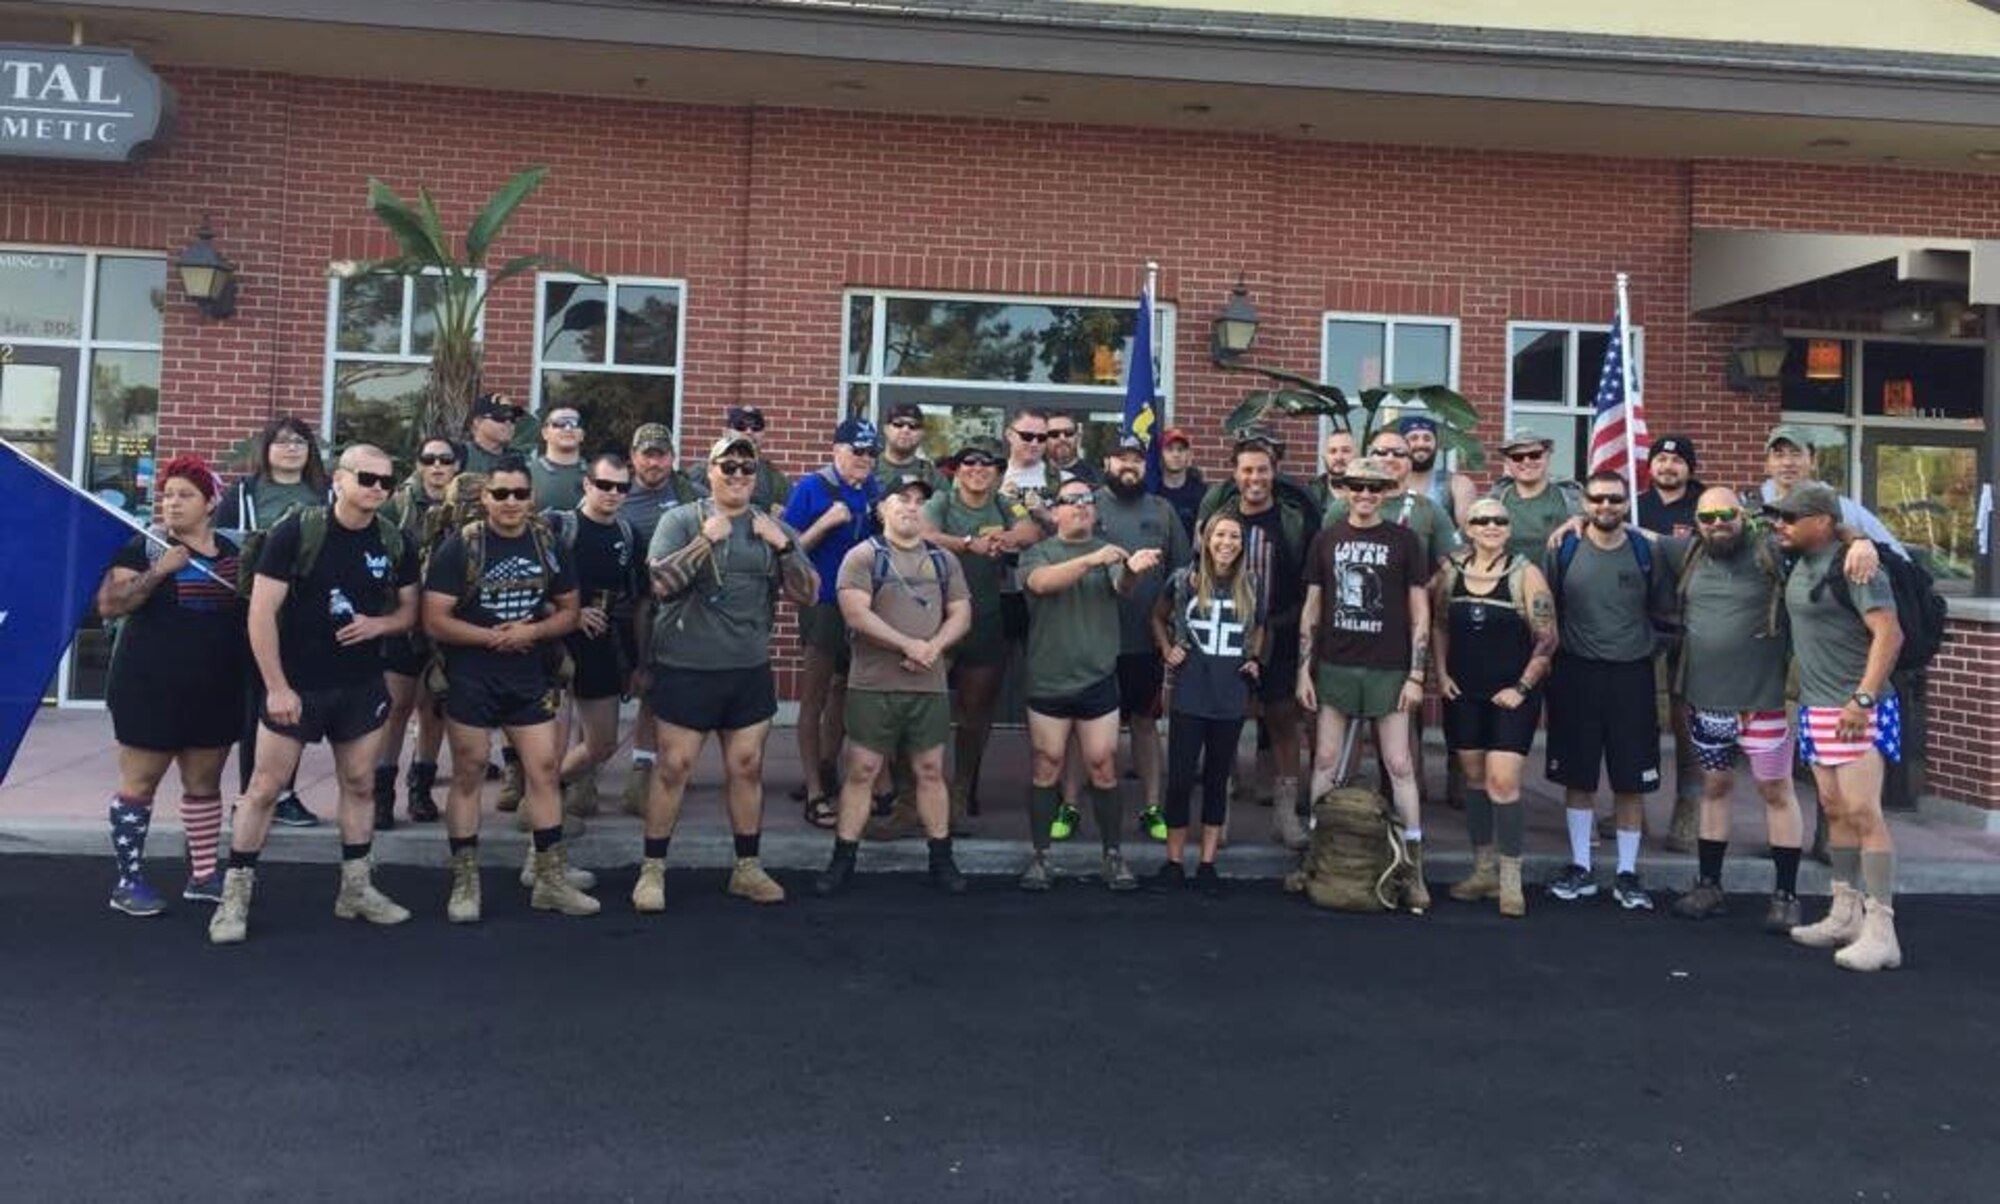 Silkies Hike participants pose for a photo Oct. 21 in Bakersfield, California. The hike brought veterans for a 22-kilometer ruck march through town to bring awareness to the 22 veteran daily suicides. (Courtesy photo)